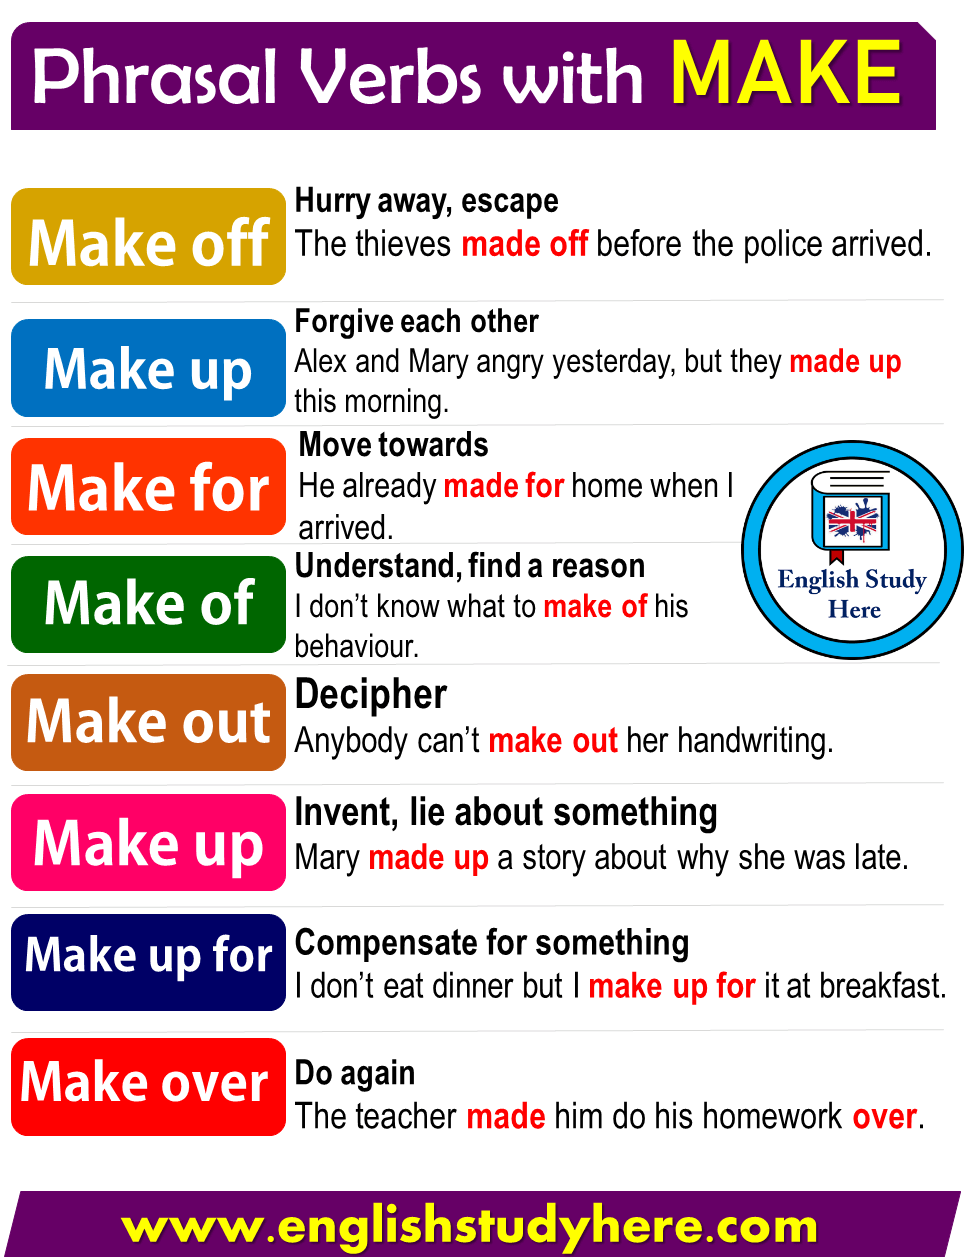 Phrasal Verbs with MAKE in English